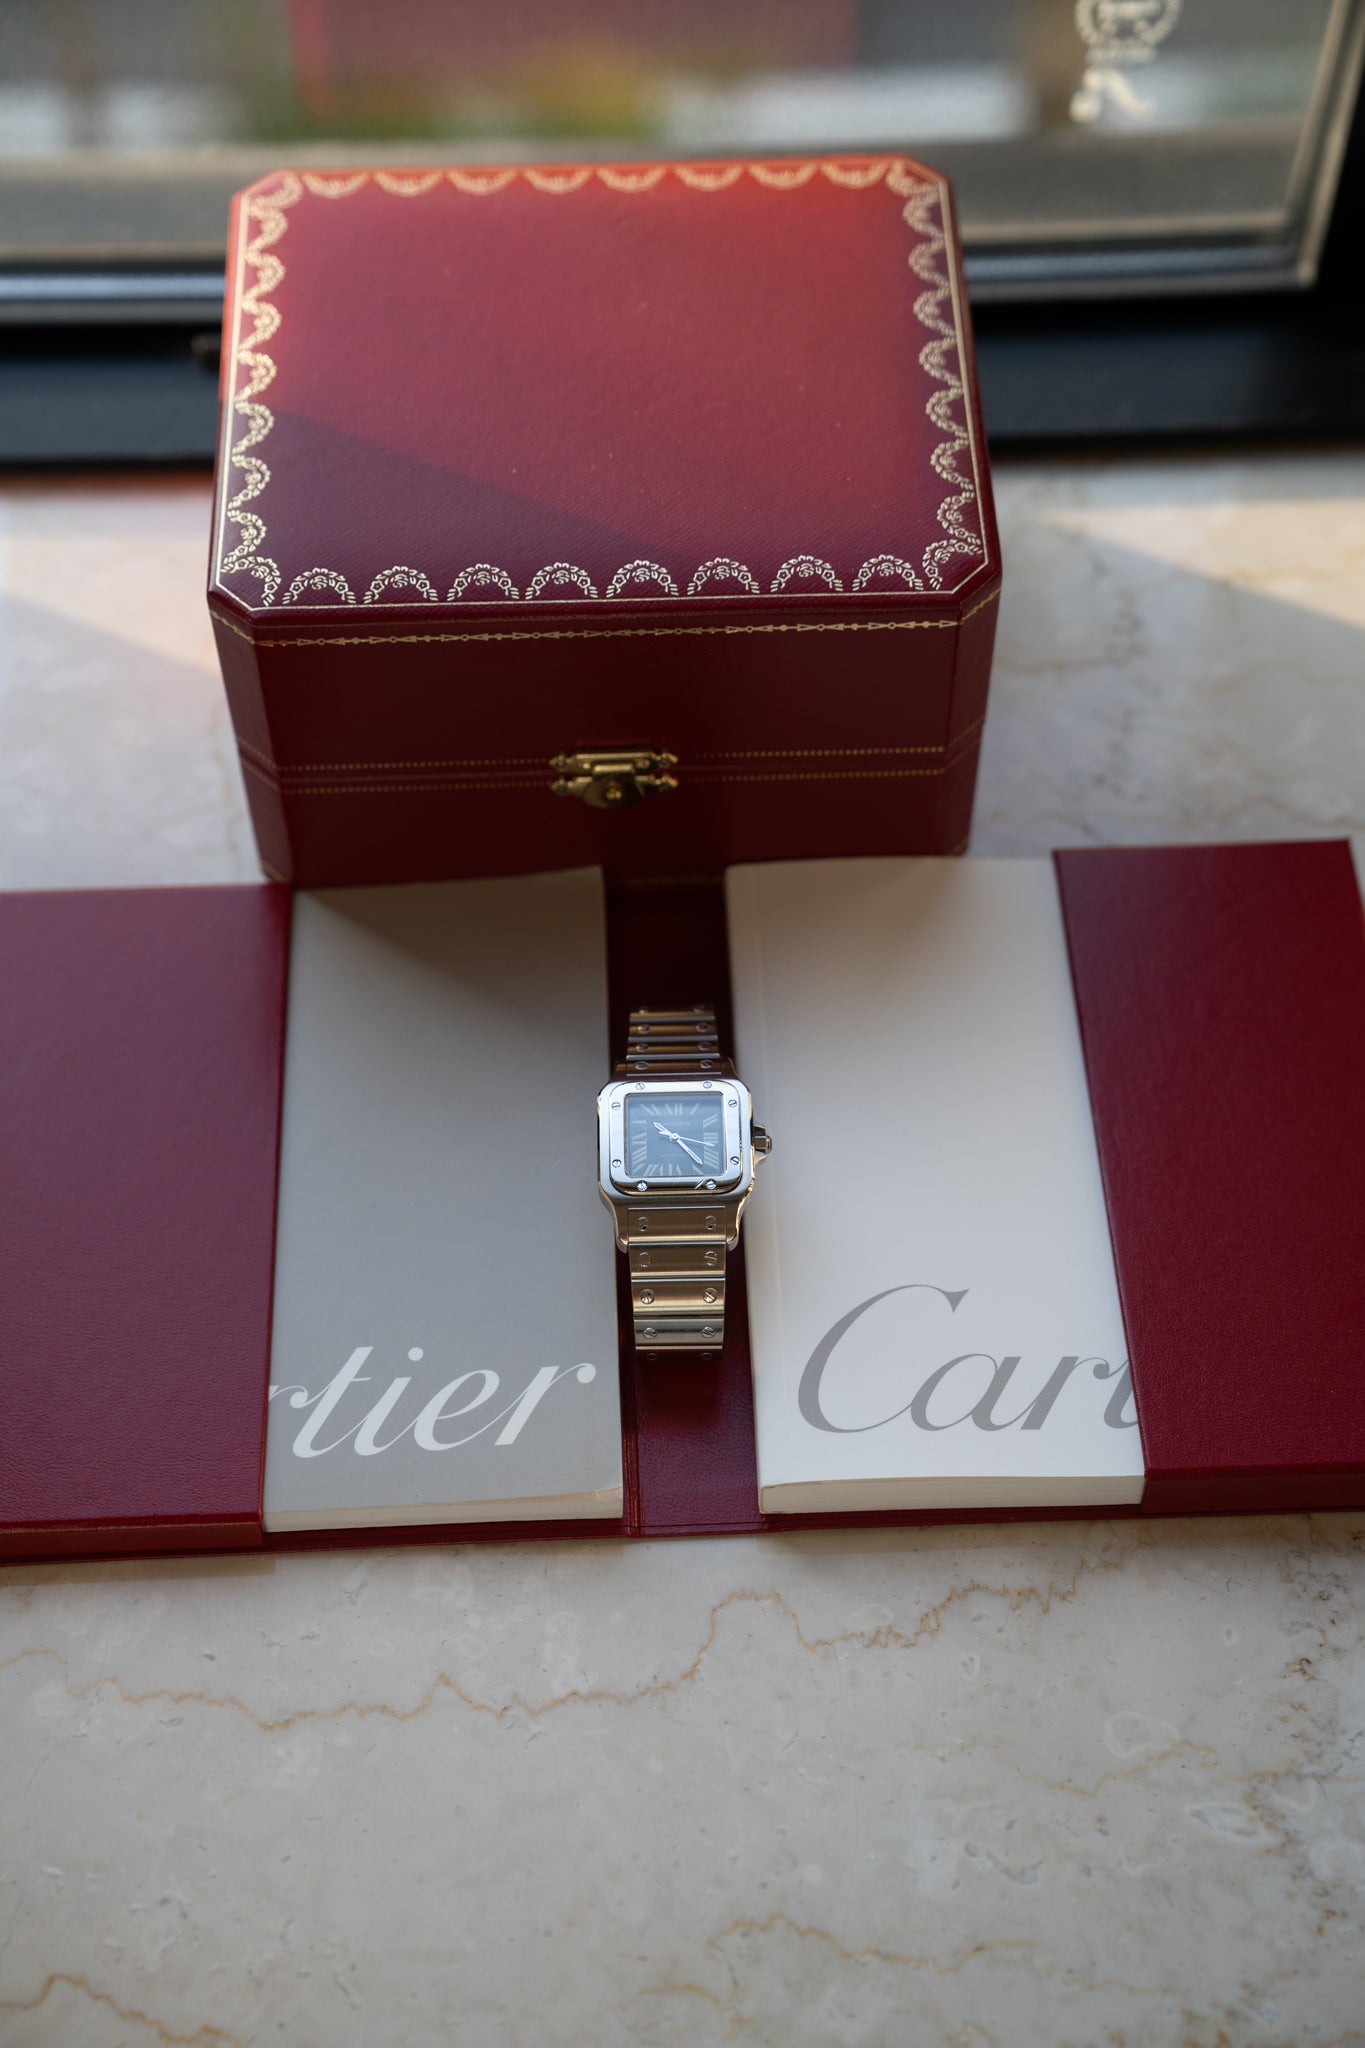 Cartier Santos Galbee LM ref 2319 SIHH Asia Limited Edition, box & papers